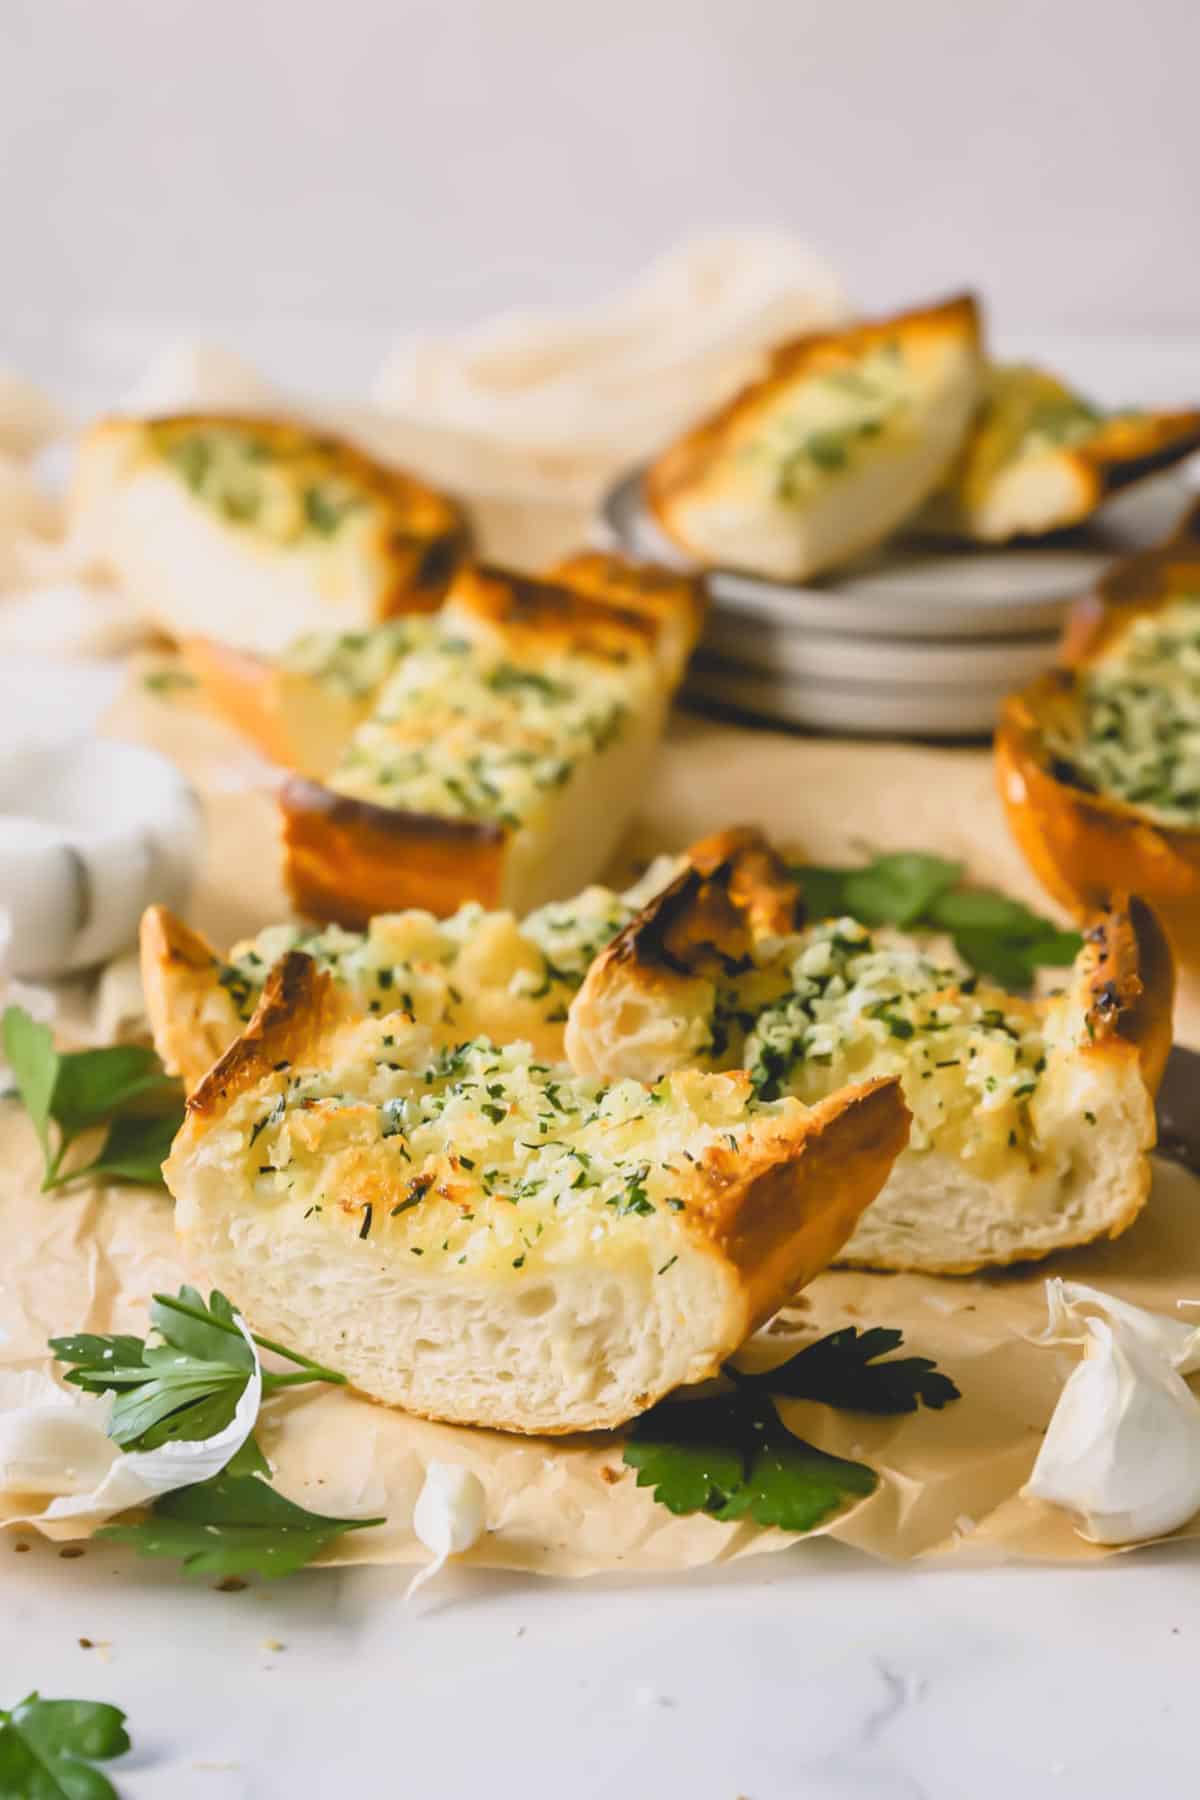 Pieces of garlic bread topped with an herbed butter spread.